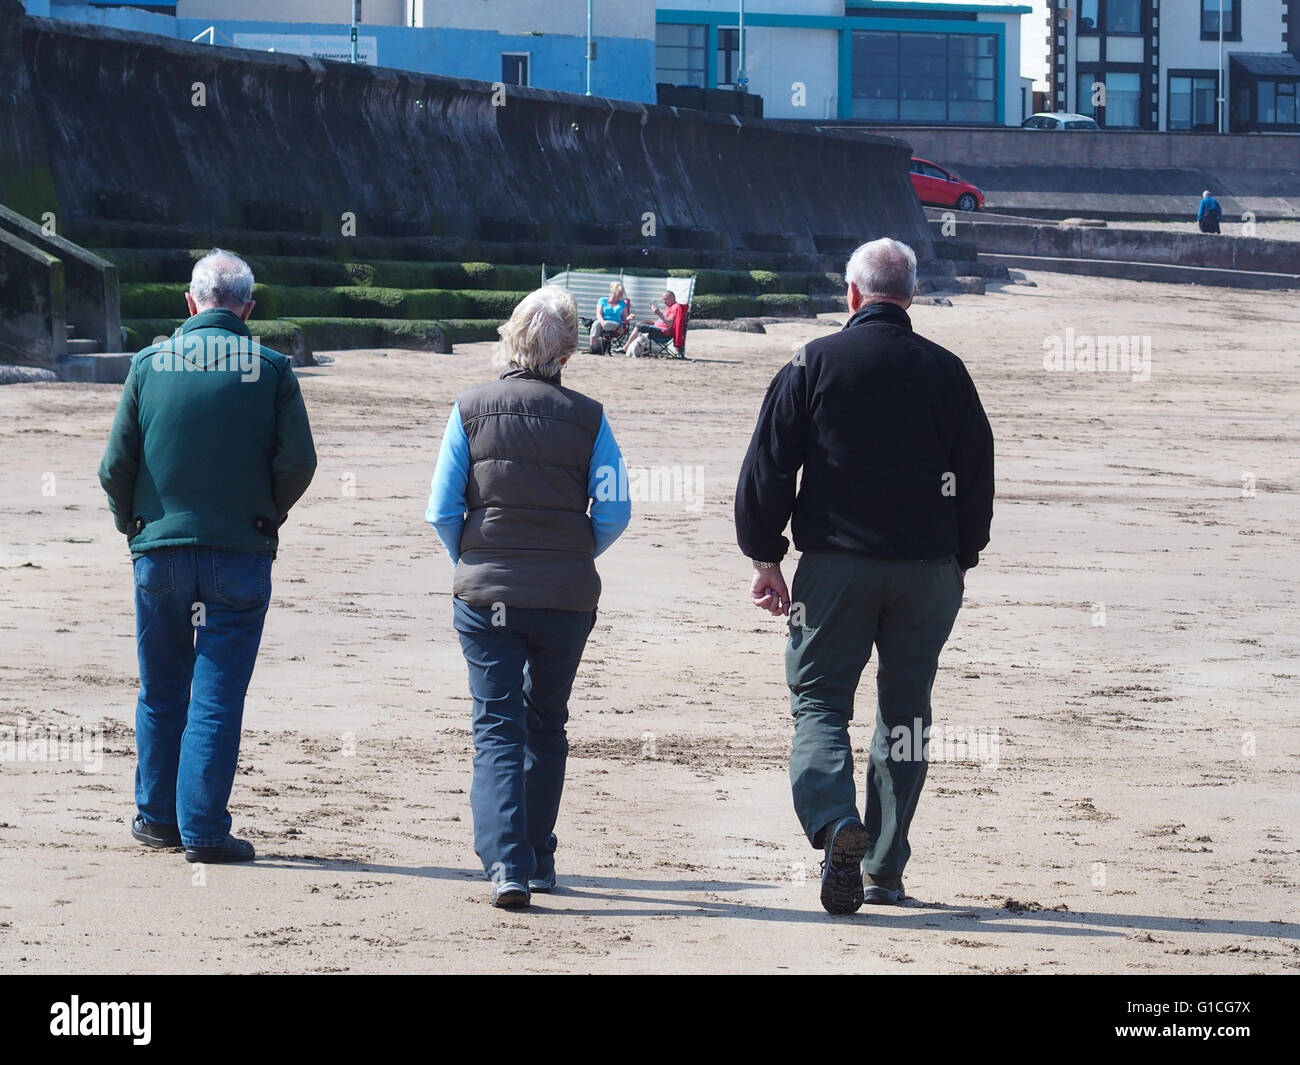 People walking on beach, Eyemouth Banque D'Images